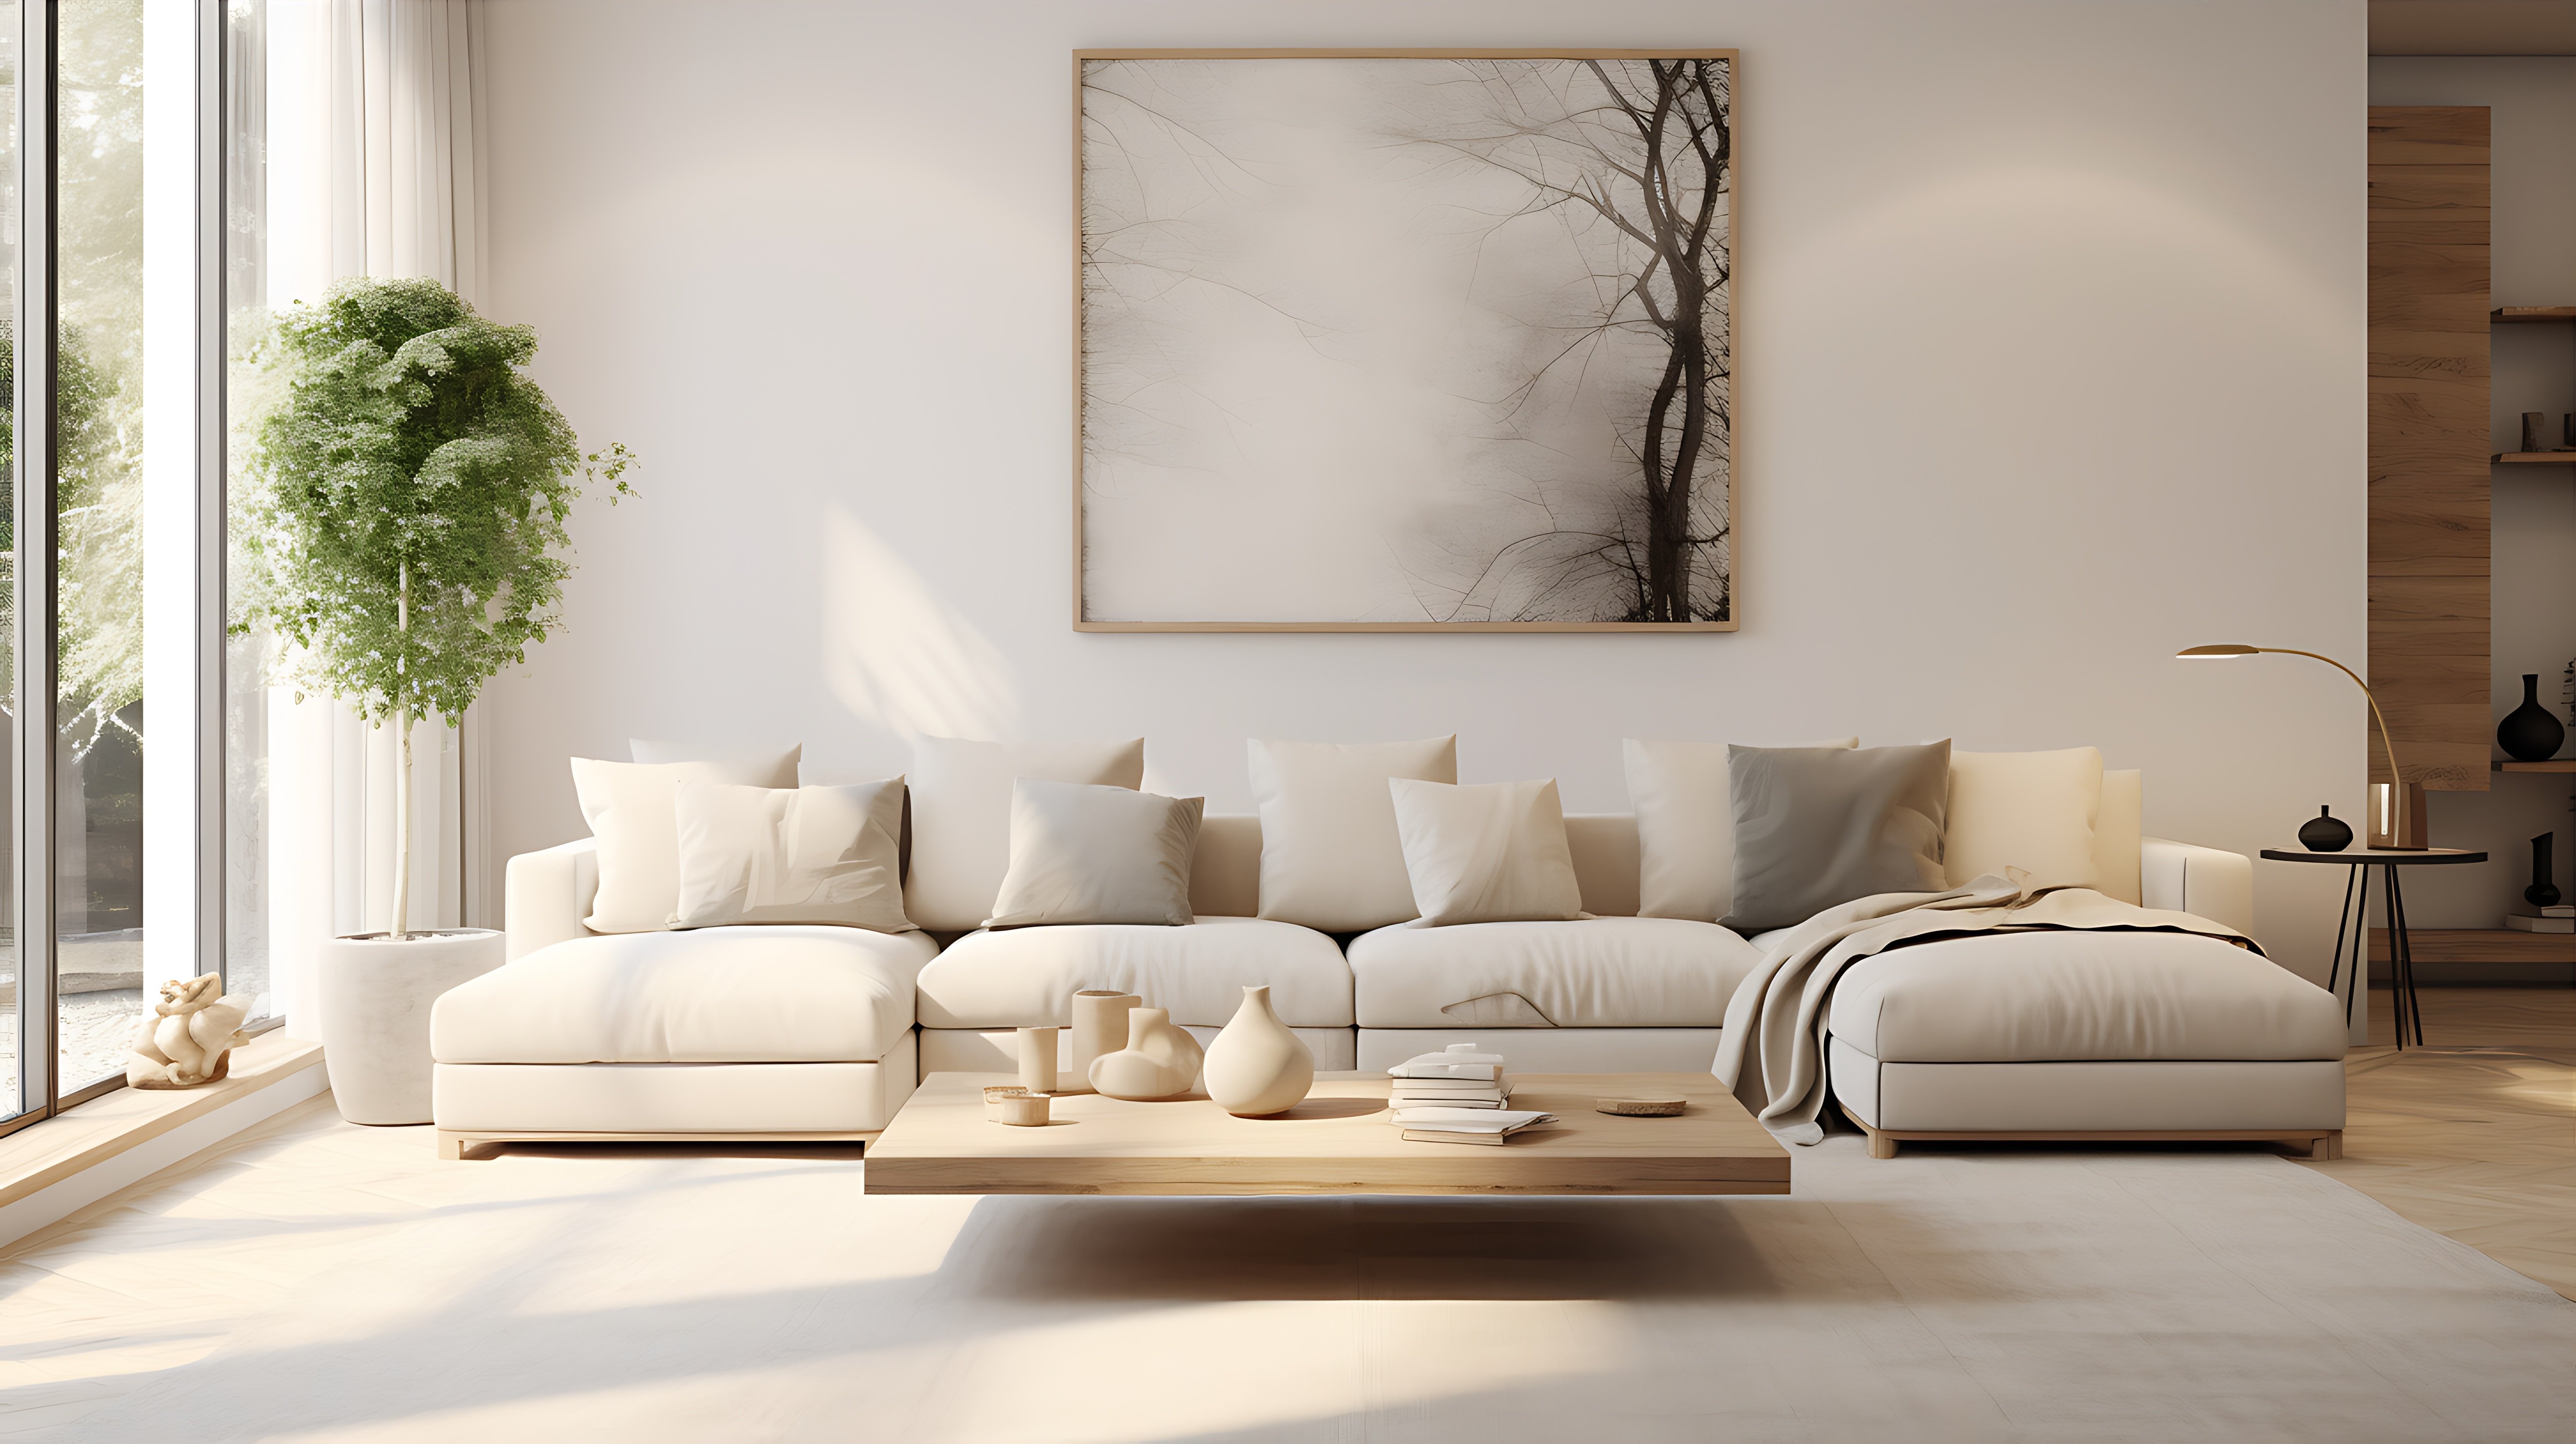 Complete guide on how to choose a sofa for your Japandi style living room: A harmony of design, materials, and color